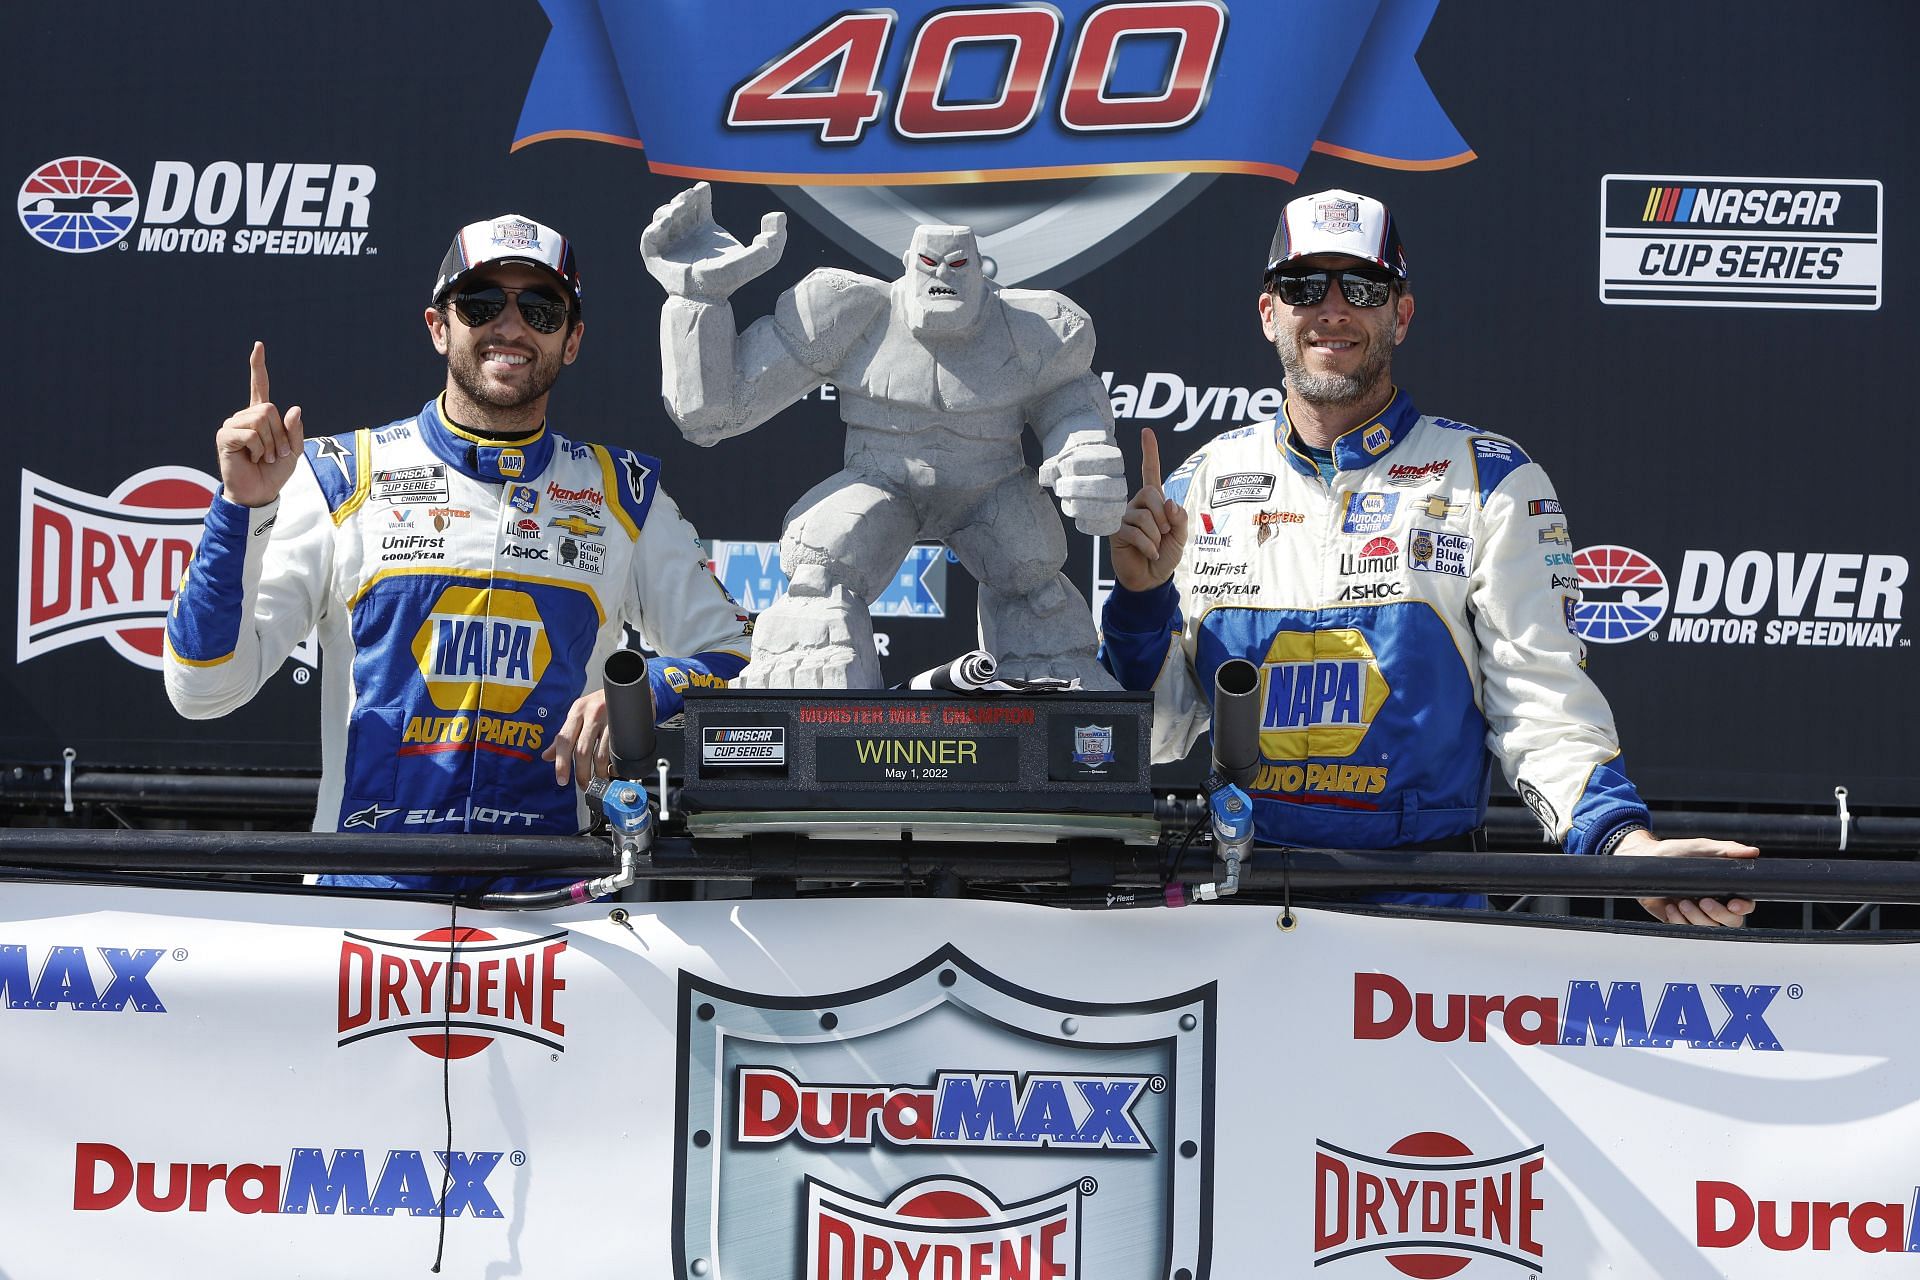 Chase Elliott and crew crew chief Alan Gustafson celebrate in victory lane after winning the NASCAR Cup Series DuraMAX Drydene 400 presented by RelaDyne at Dover Motor Speedway (Photo by Sean Gardner/Getty Images)